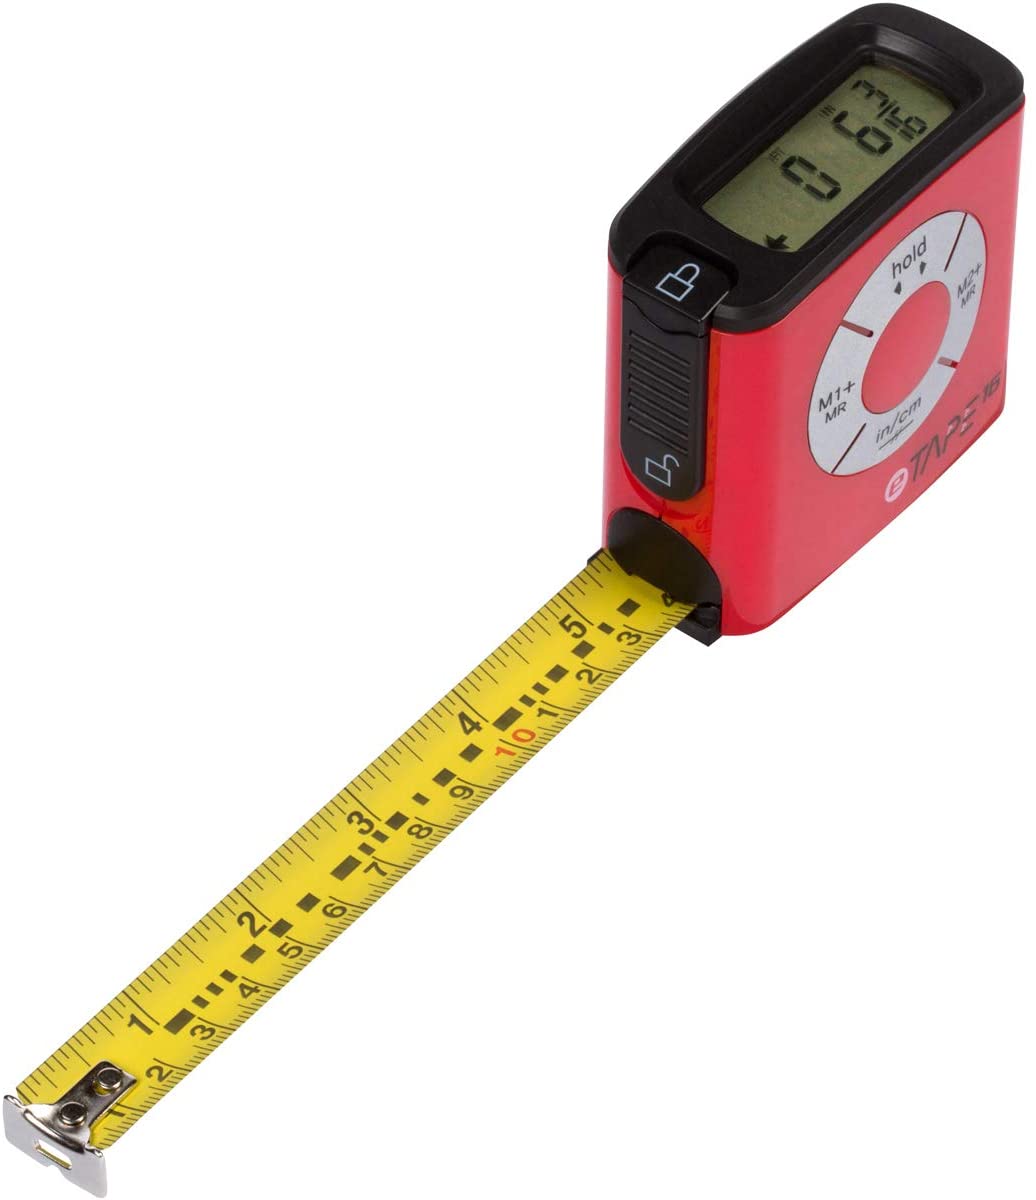 Personalized Father's Day Gift Ideas—Digital Electronic Tape Measure